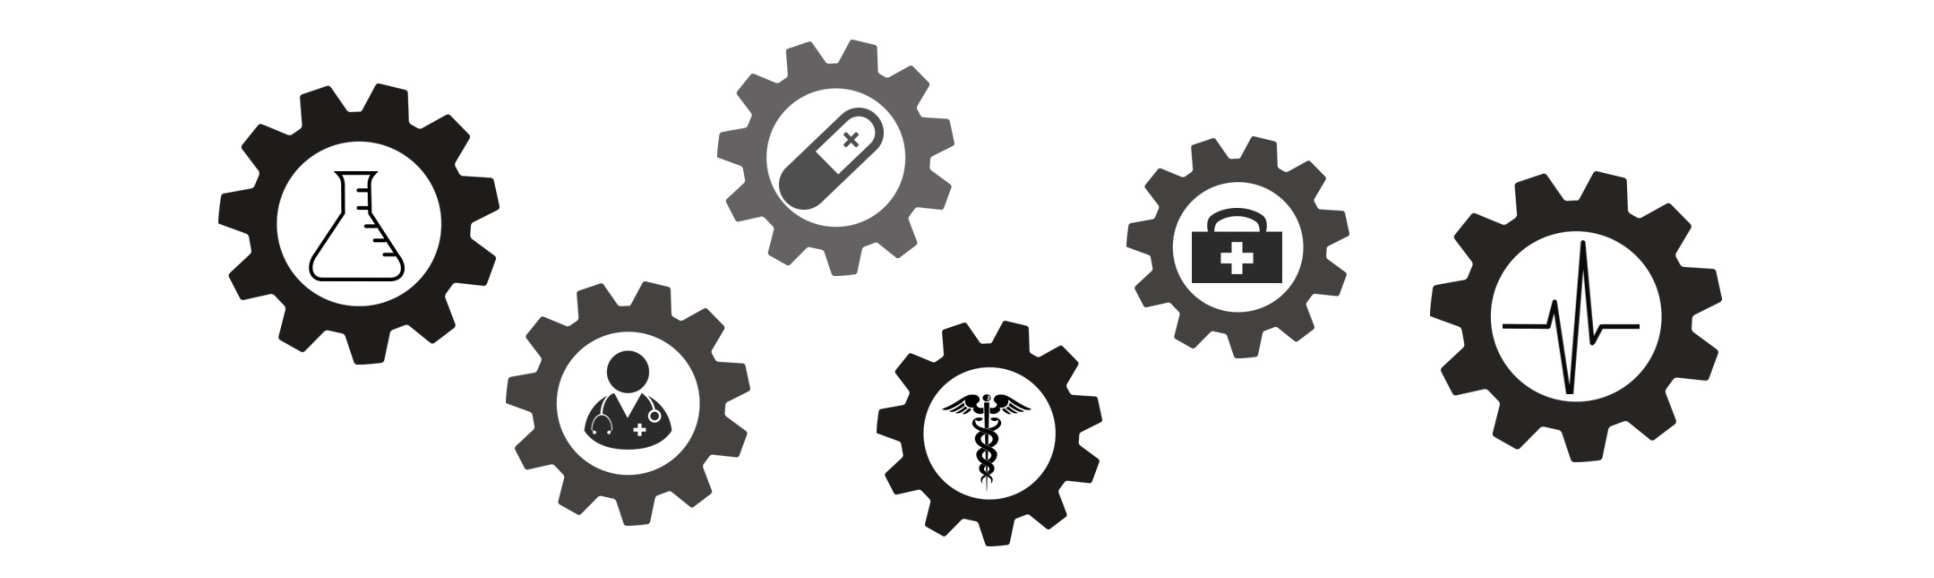 Cog icons with icons depicting health and research inside